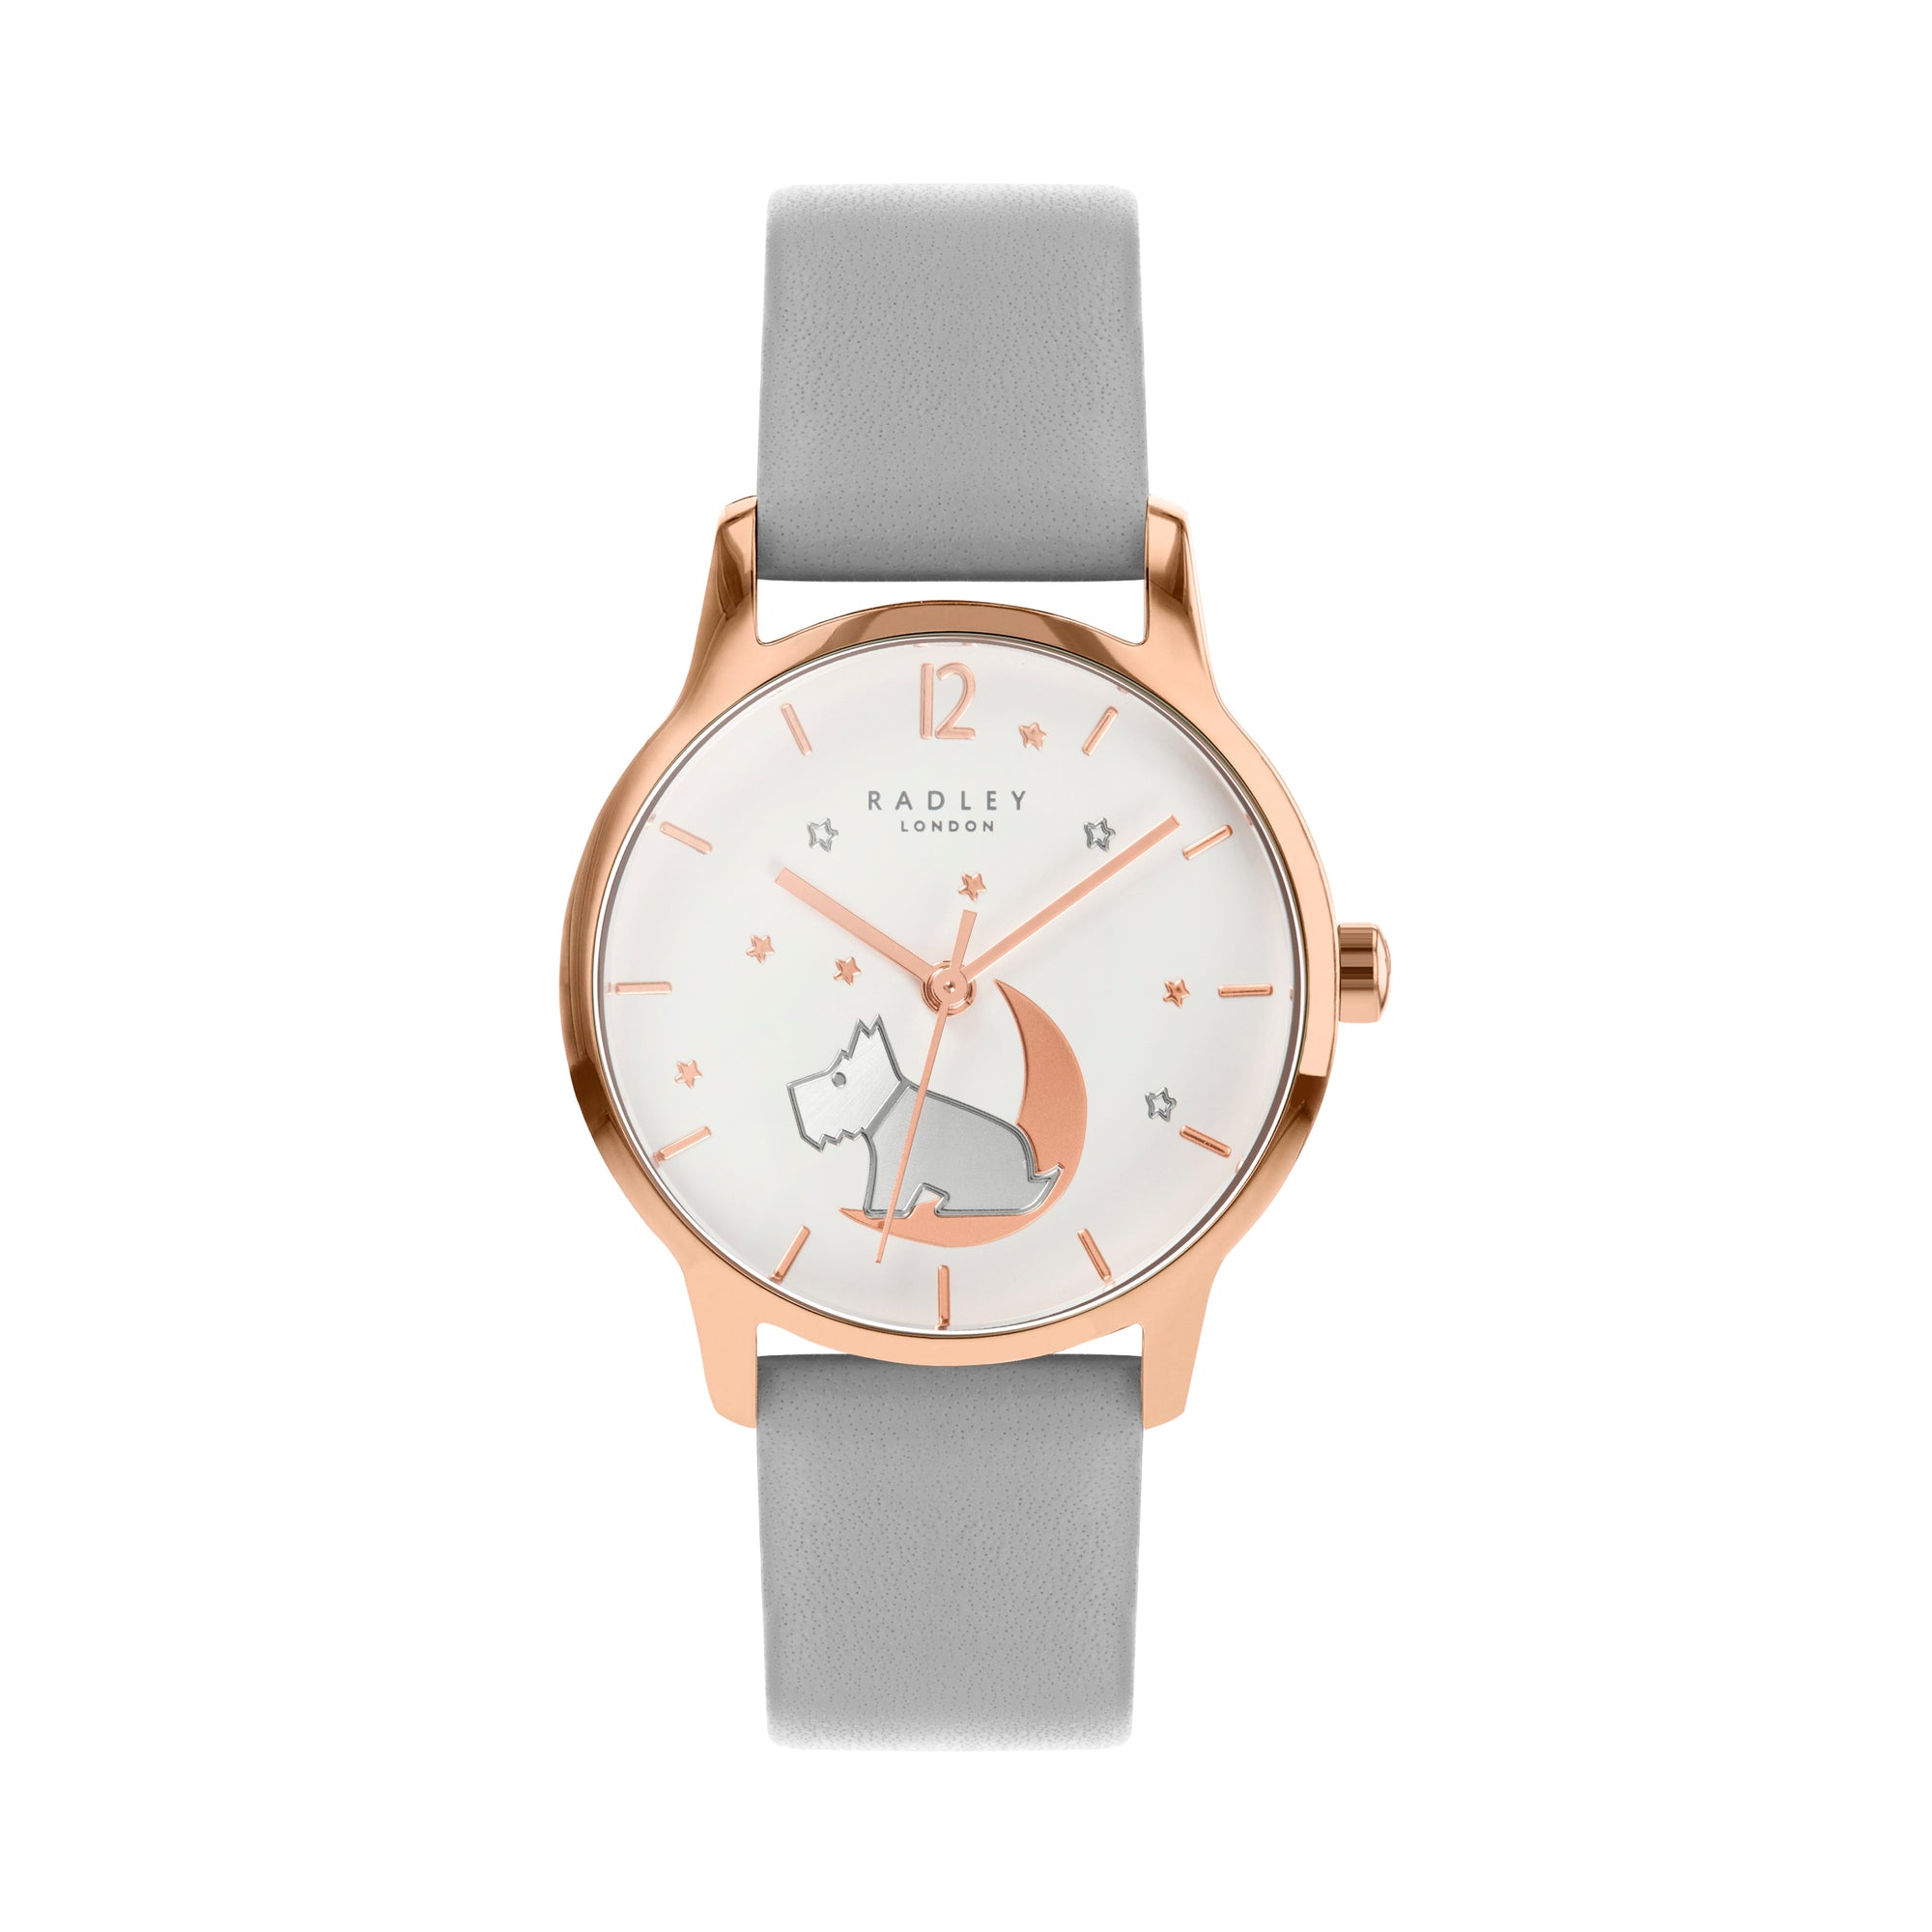 Radley Ladies Watch in Rose Gold with Grey Strap RY2950A Watches Radley 